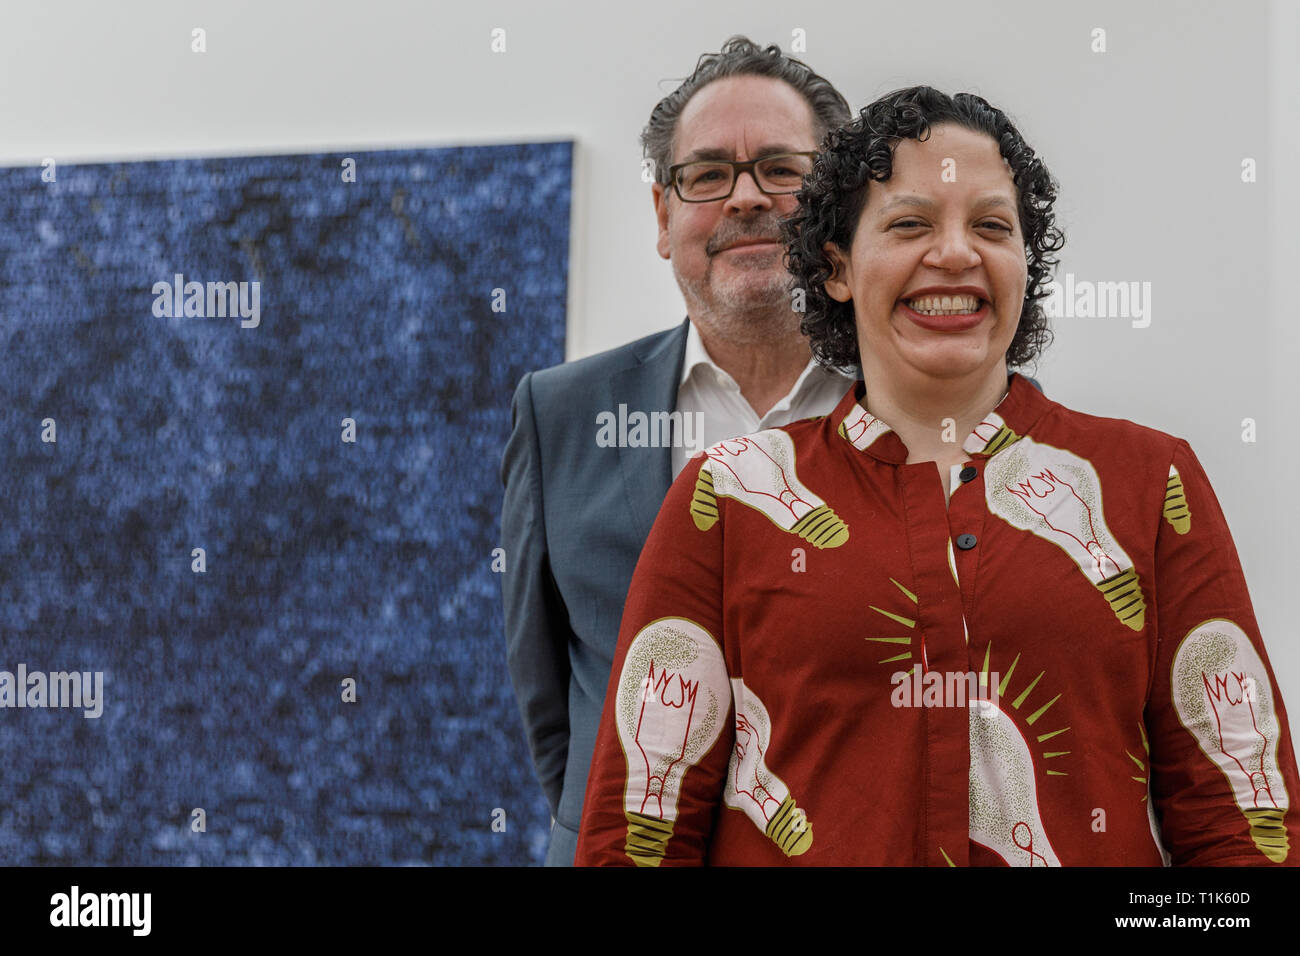 Berlin, Germany. 27th Mar, 2019. Udo Kittelmann (l), curator and director of the Nationalgalerie- Staatliche Museen zu Berlin, and Mirsini Amidon, daughter of the American painter Jack Whitten, stand in front of Jack Whitten's work 'Quantum Wall' in the exhibition 'Jack Whitten. Jack's Jacks' at the Hamburger Bahnhof - Museum für Gegenwart - Berlin. The US-American artist lived from 1939 to 2018. The exhibition is on view from 29.03.2019 to 01.09.2019. Credit: Carsten Koall/dpa/Alamy Live News Stock Photo